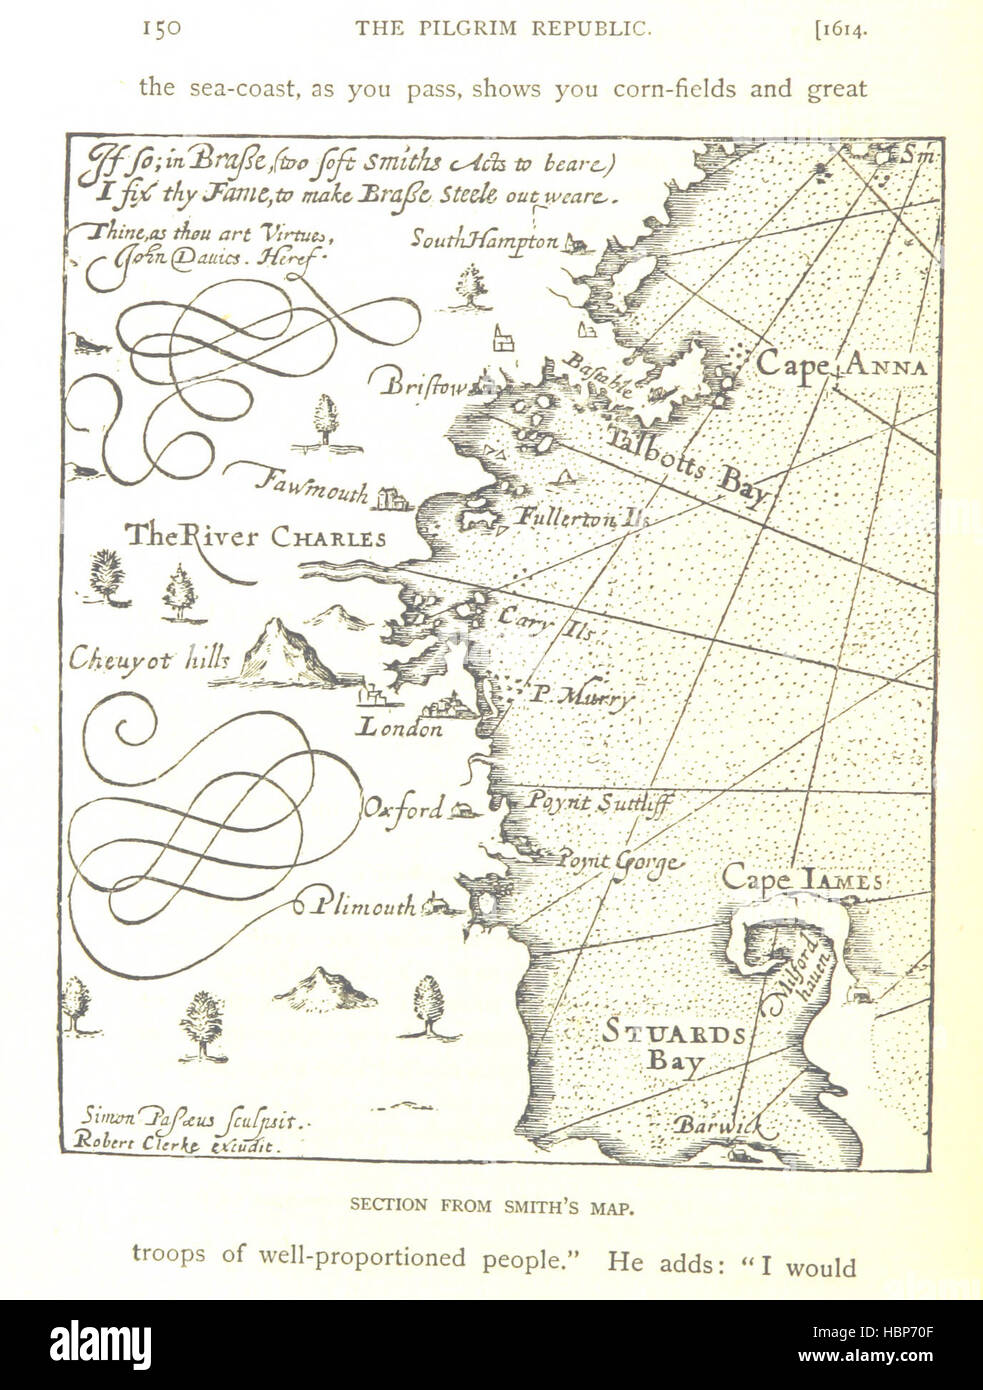 Image taken from page 206 of 'The Pilgrim Republic; an historical review of the Colony of New Plymouth, with sketches of the rise of other New England Settlements, etc' Image taken from page 206 of 'The Pilgrim Republic; an Stock Photo